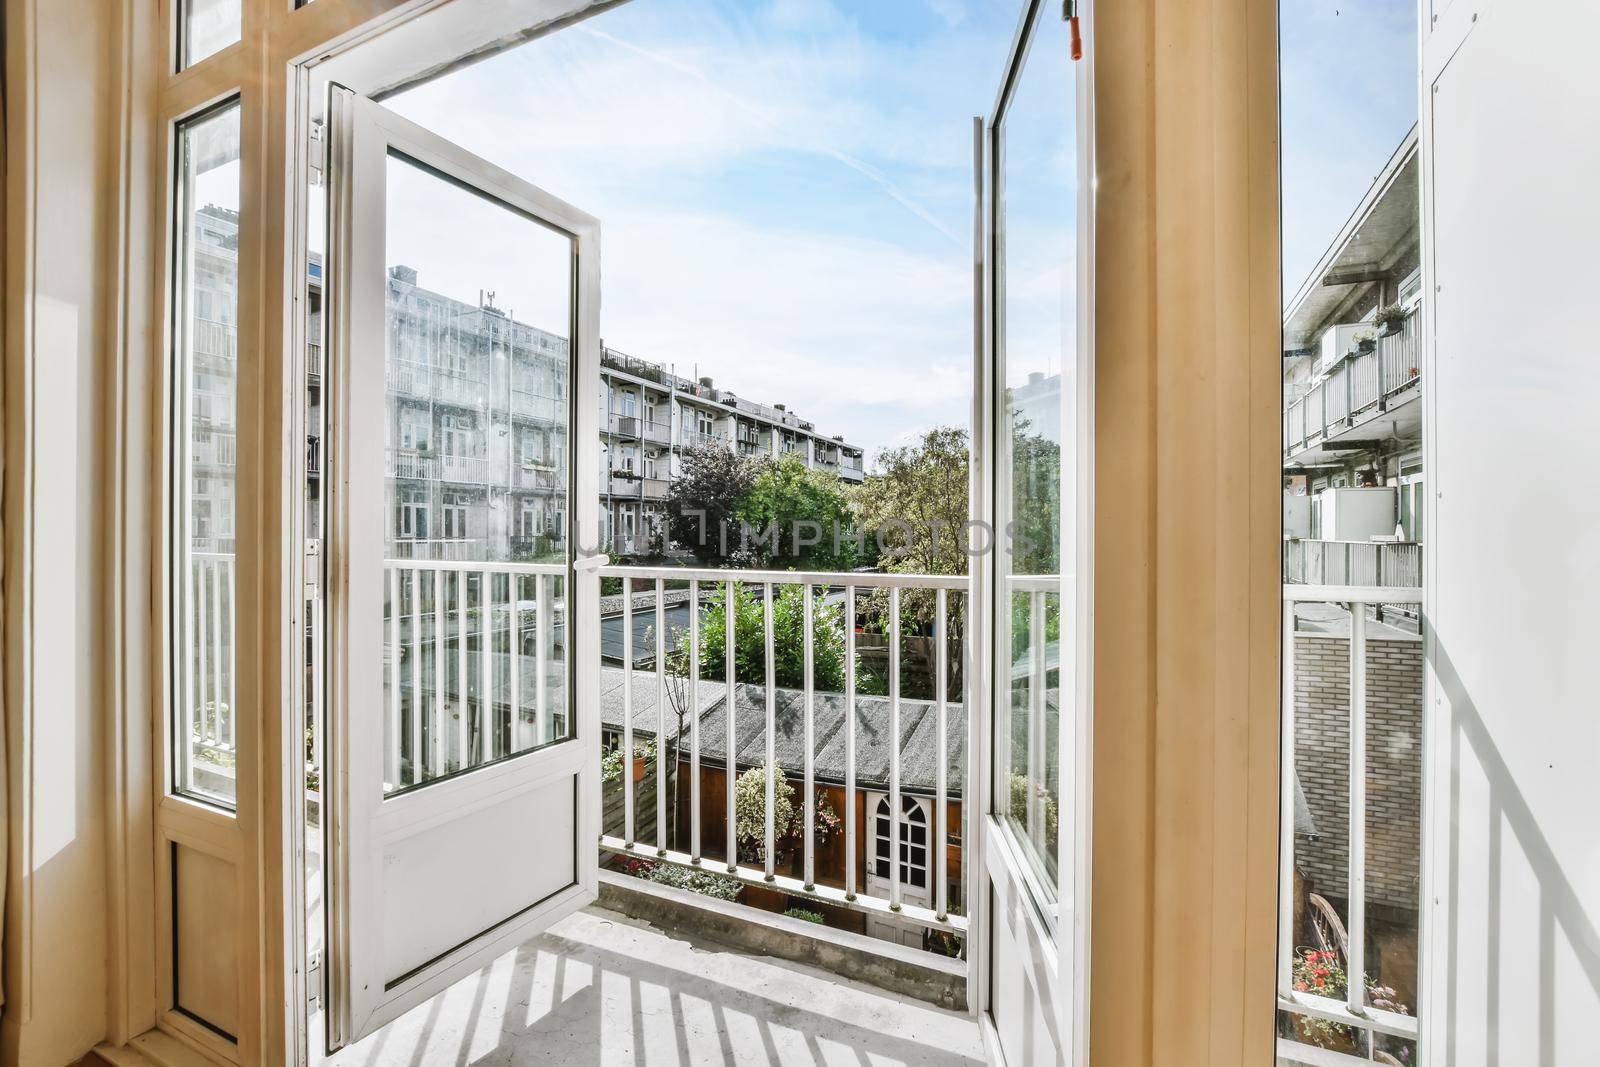 Open doors leading to a balcony with a beautiful view